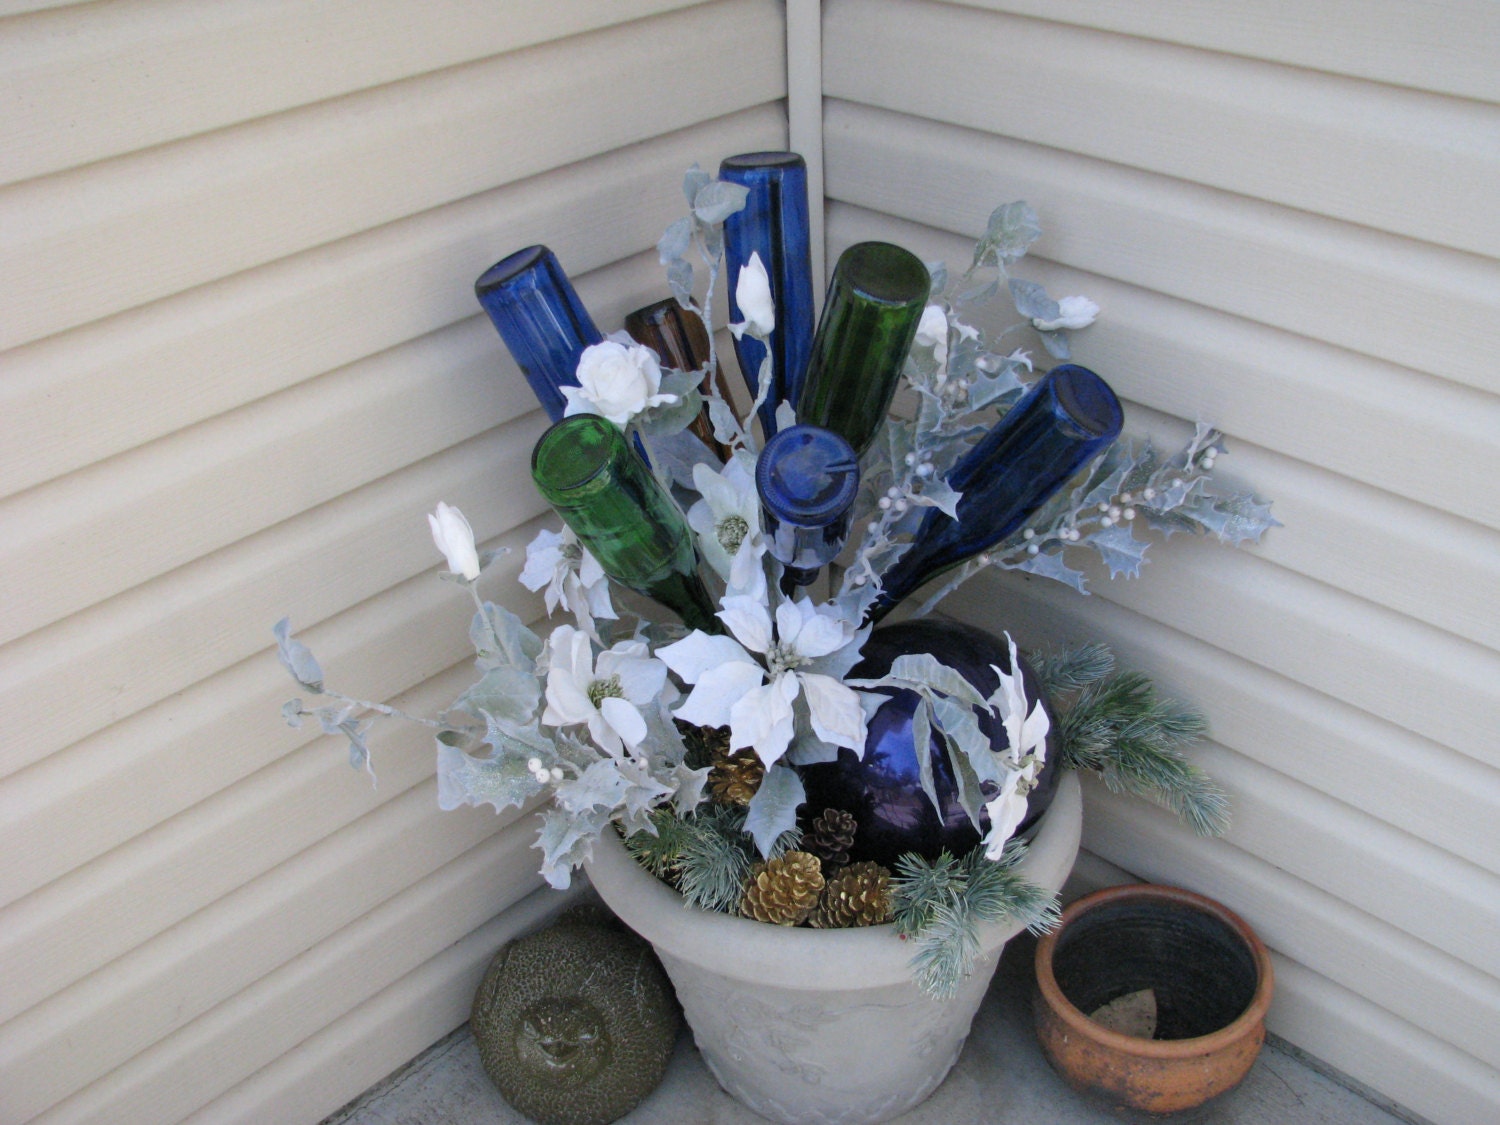 Bottle trees, a Southern tradition that brightens the garden - Digging